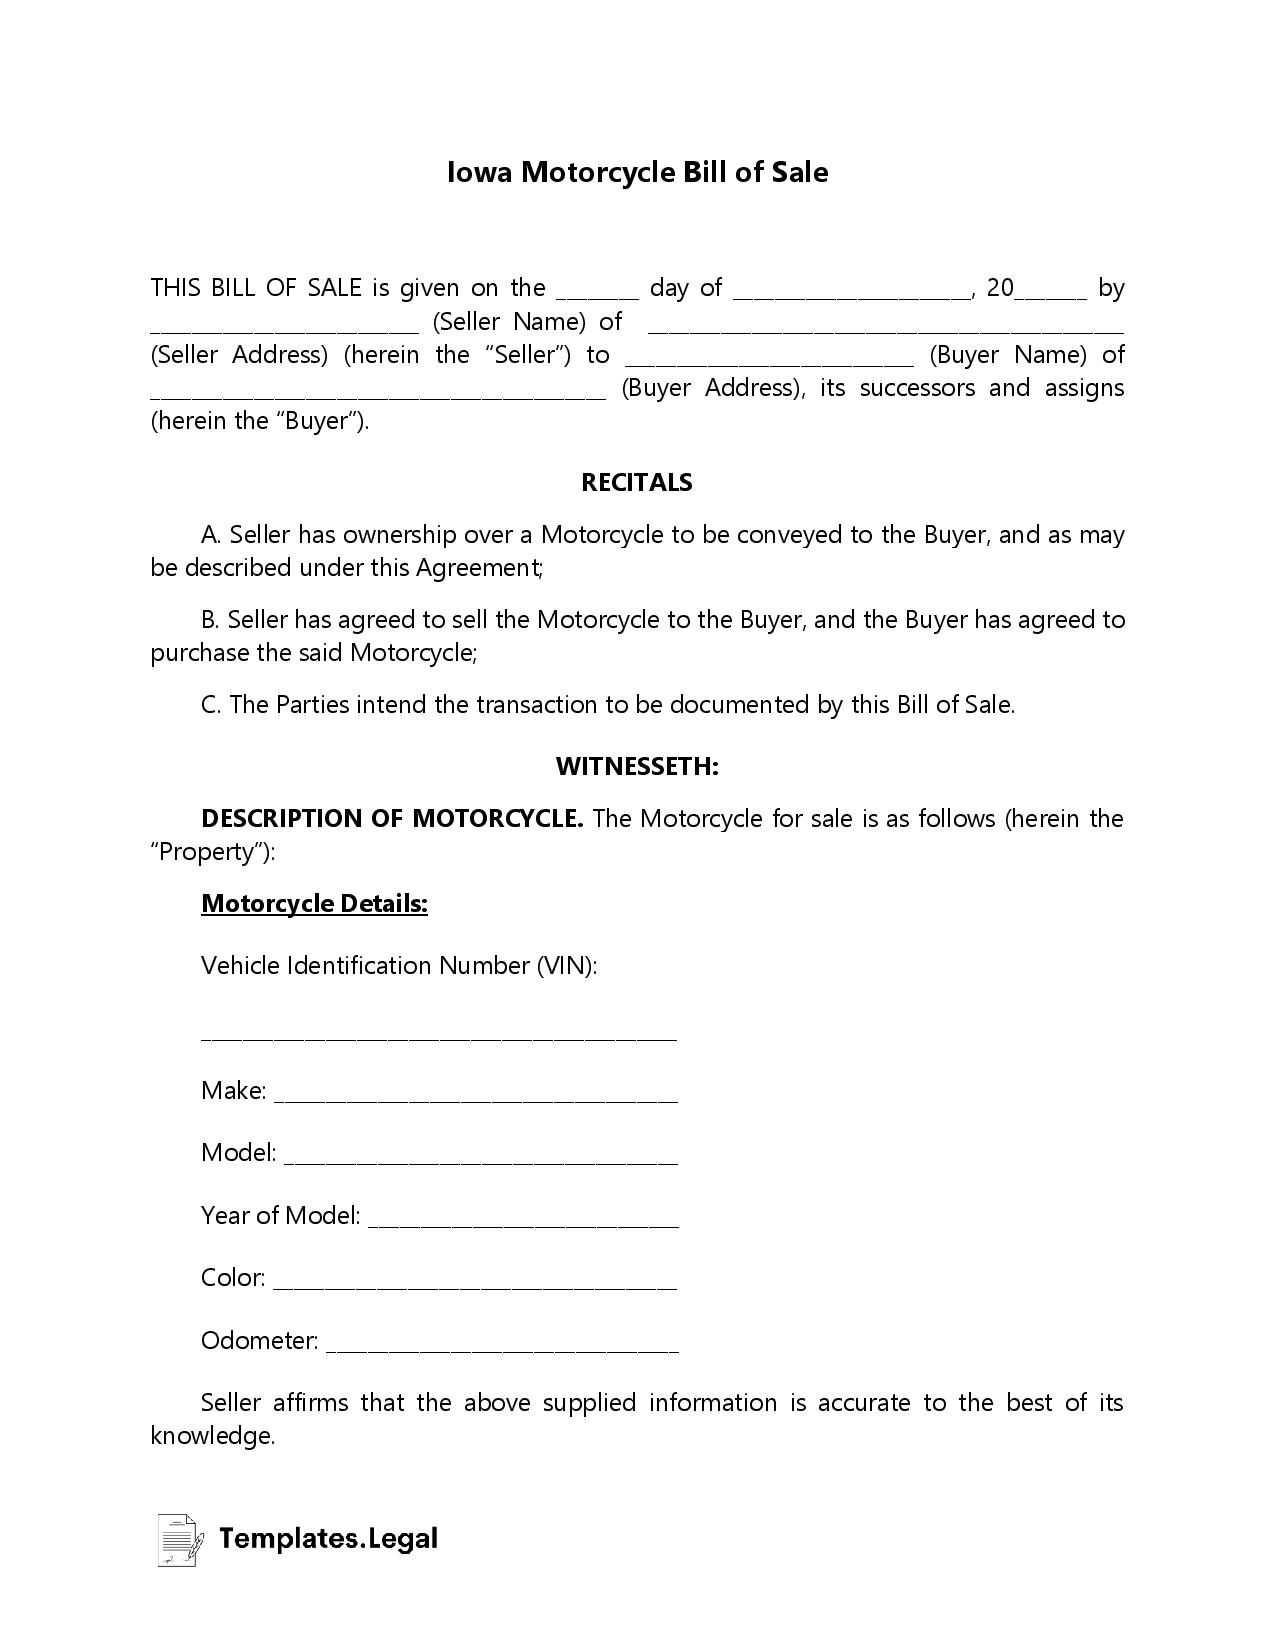 Iowa Motorcycle Bill of Sale - Templates.Legal